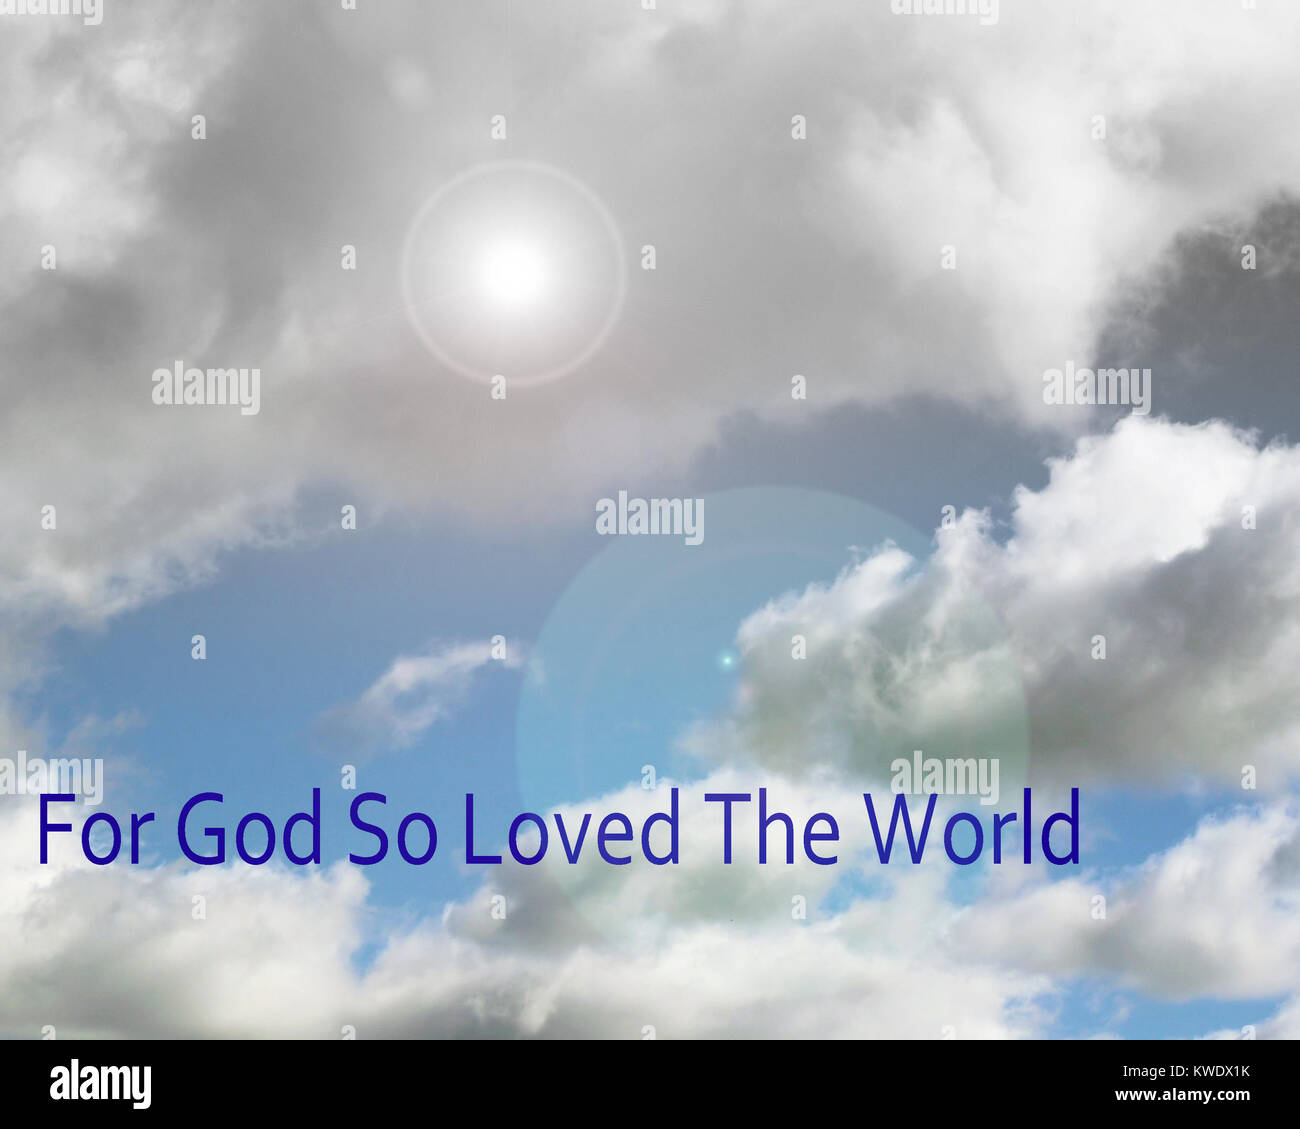 FOR GOD SO LOVED THE WORLD - beautiful clouds in a bright blue sky with bright light Stock Photo